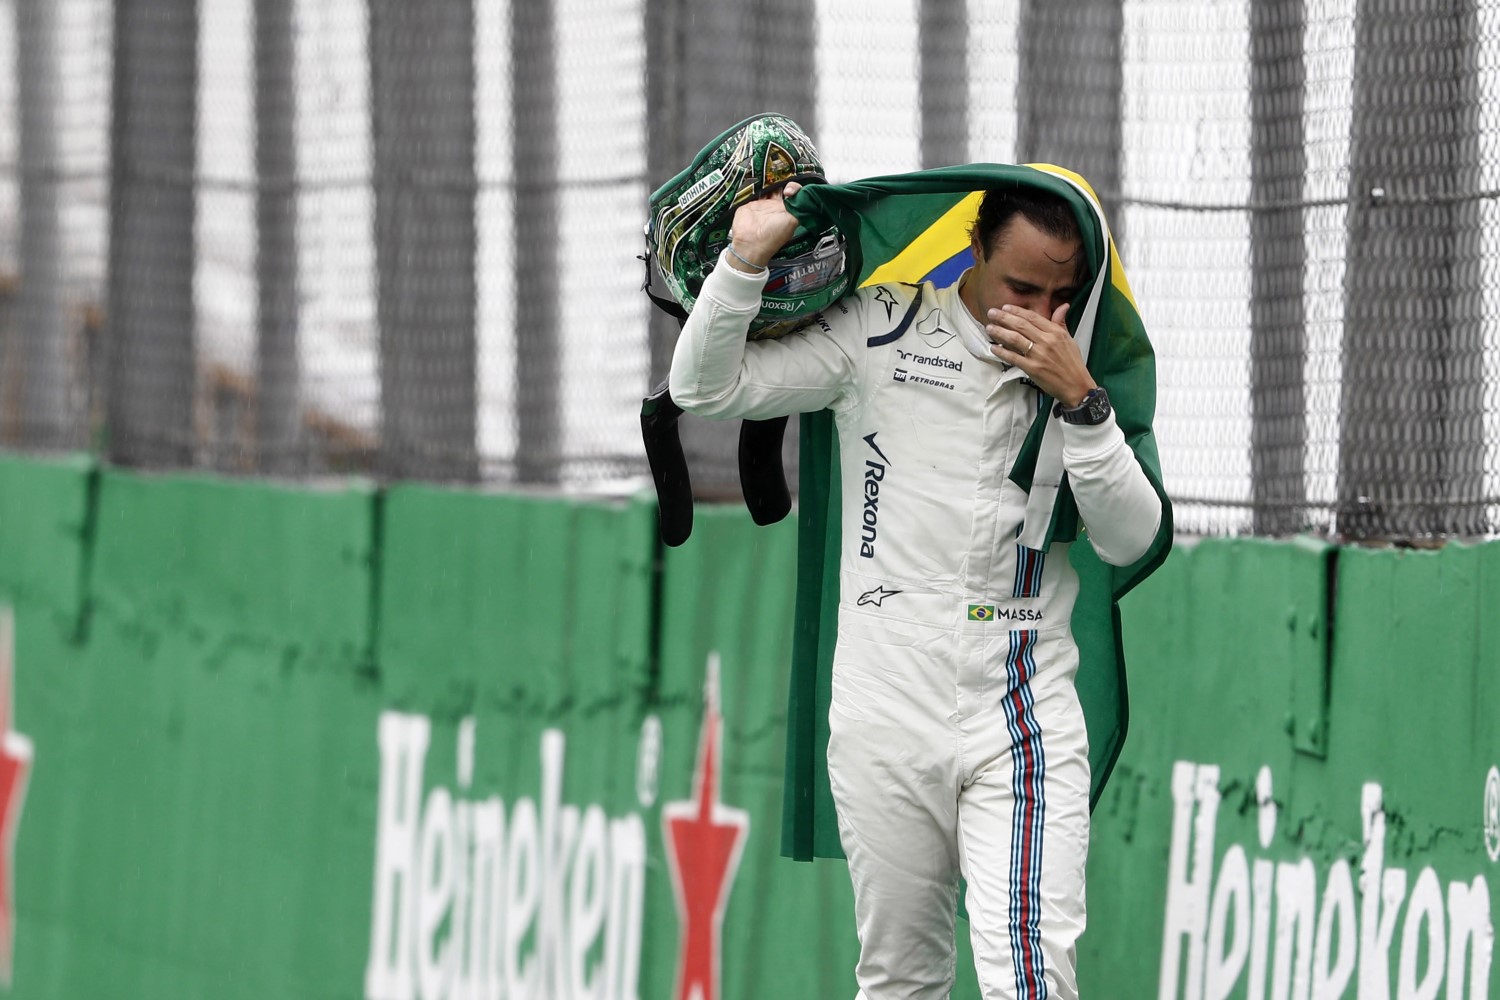 Massa cried when he retired, now he is back